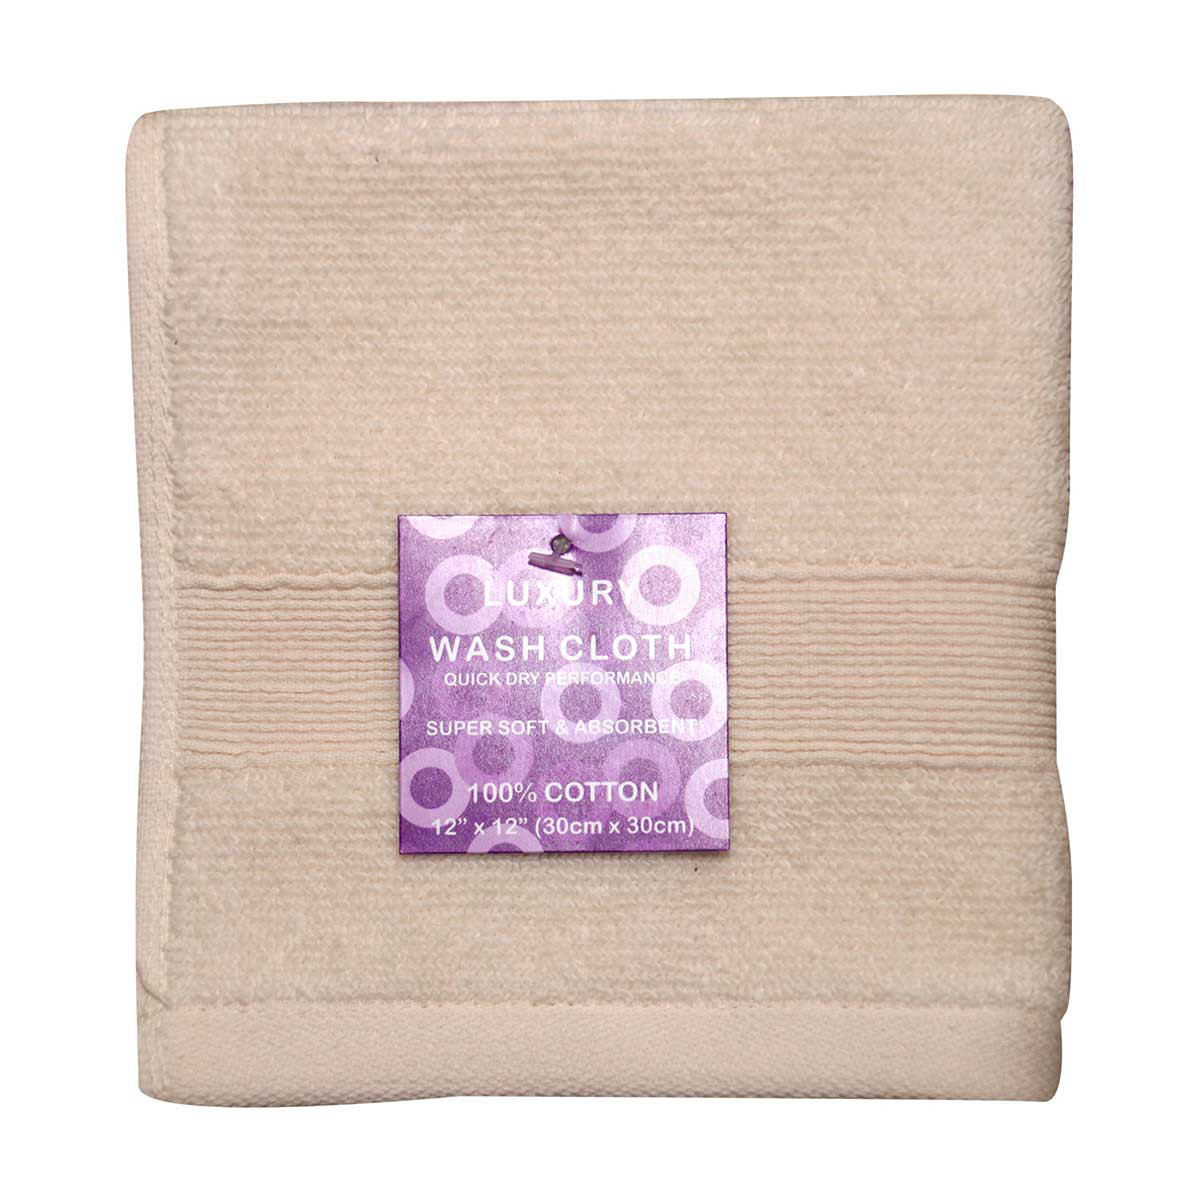 Luxury Cotton Wash Cloth, Ivory, 12 in x 12 in